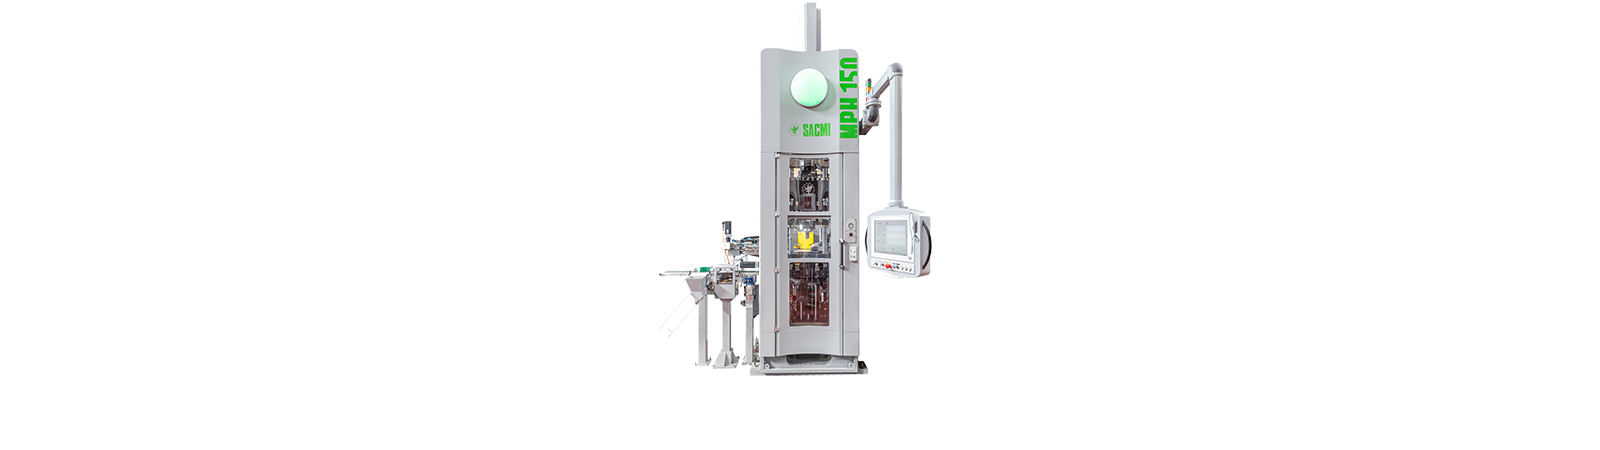 The new MPH150 is a CNC hydraulic press equipped with three upper and three lower auxiliary axes and a pressing force of 150 tons.